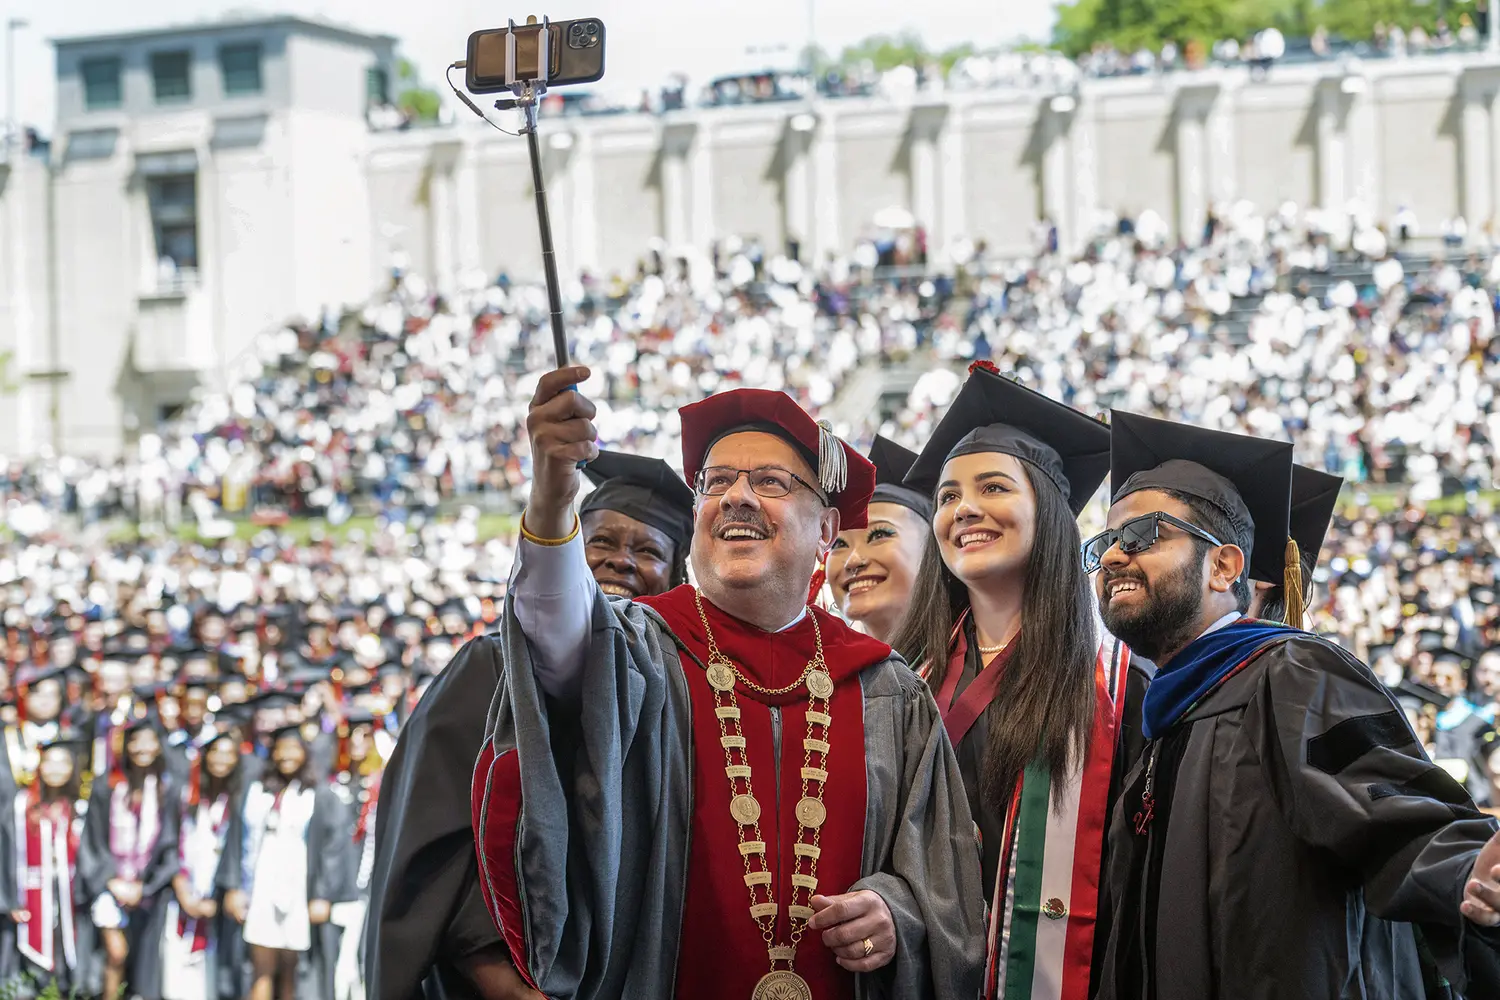 Farnam Jahanian takes a selfie at Commencement